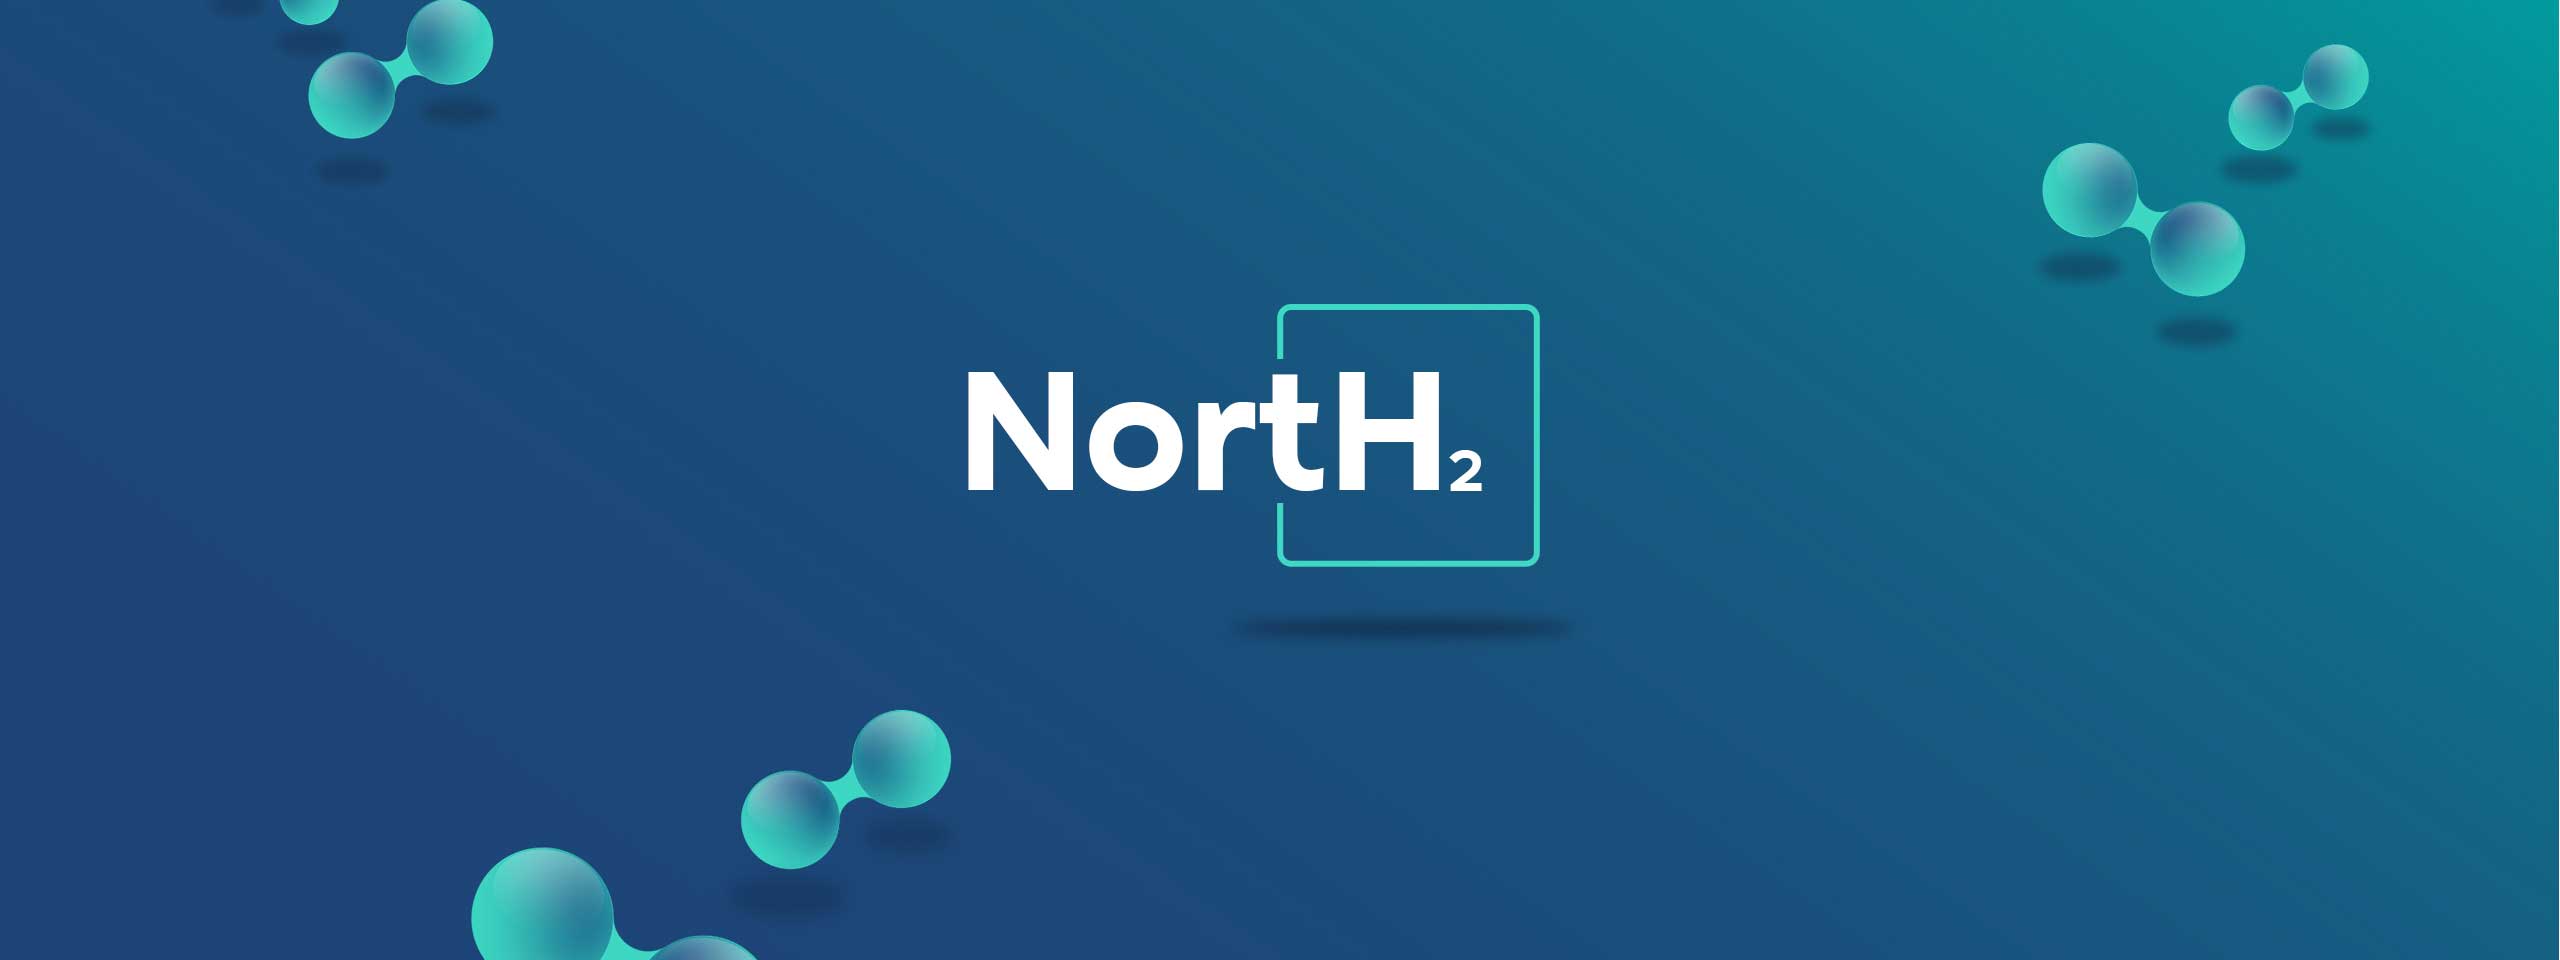 NortH2 – Developing a green hydrogen centre in north-western Europe